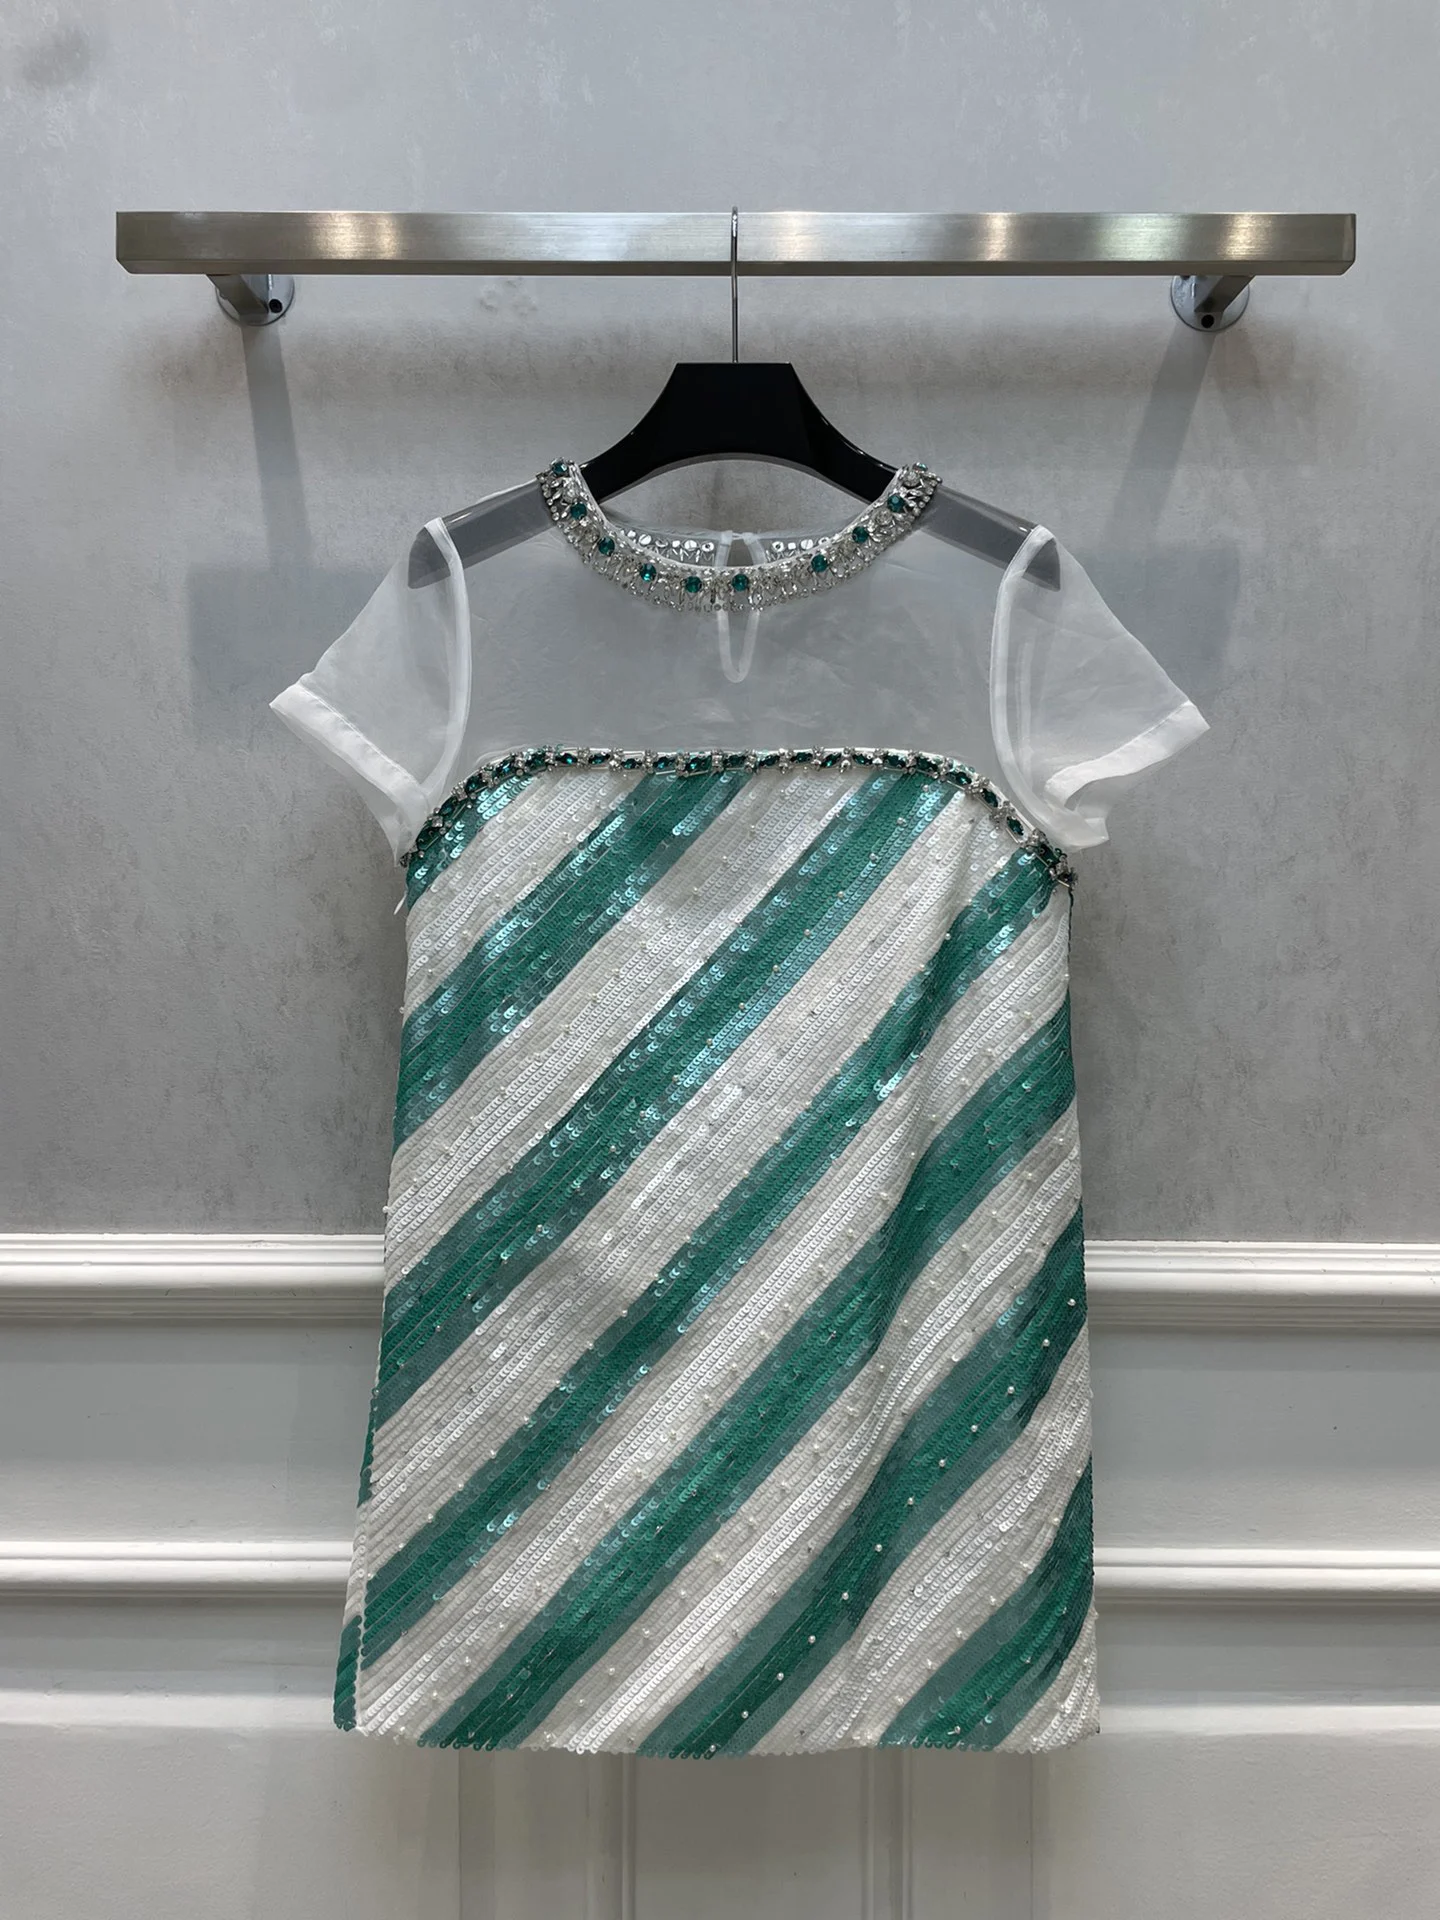 

Spring/summer new mesh splicing sequin striped dress Transparent mesh covers the skin hazy7.9